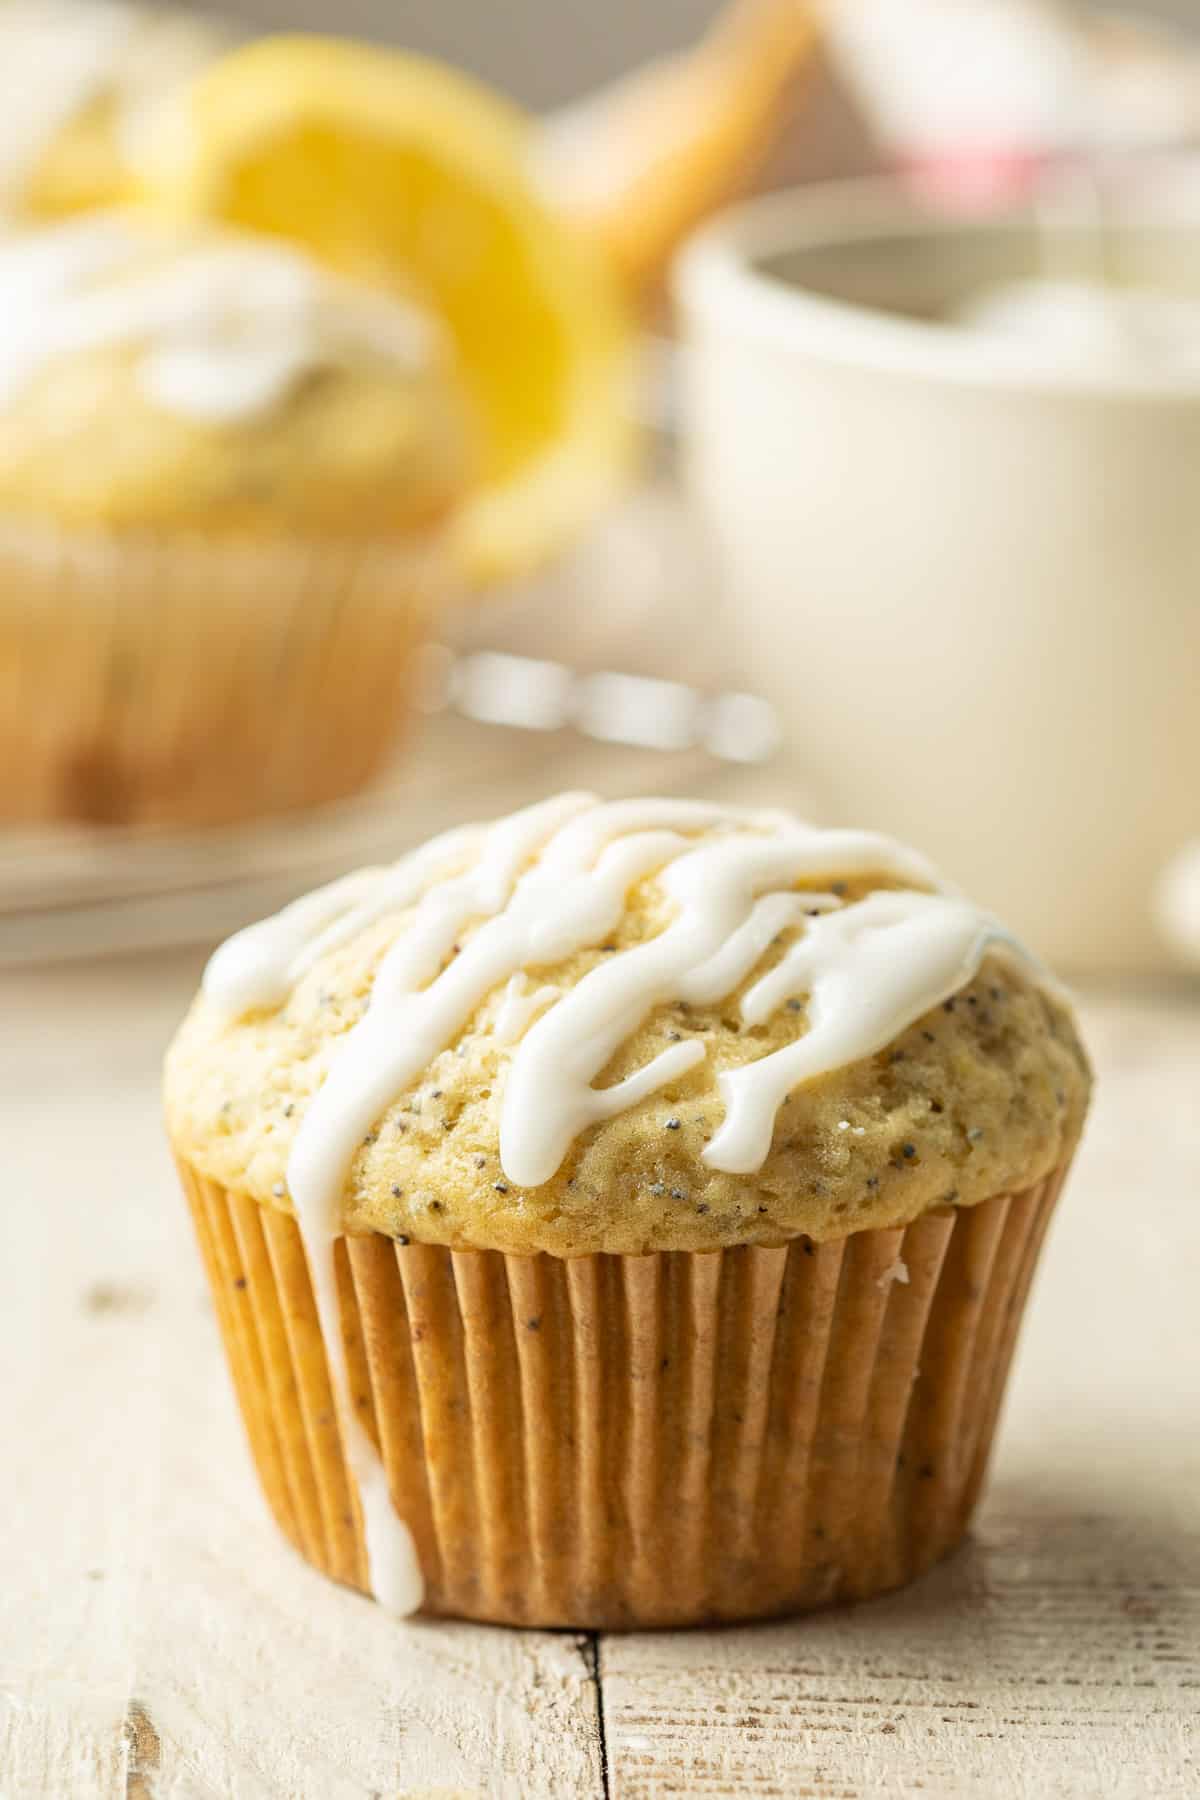 Vegan Lemon Poppy Seed Muffin with tea cup and lemons in the background.